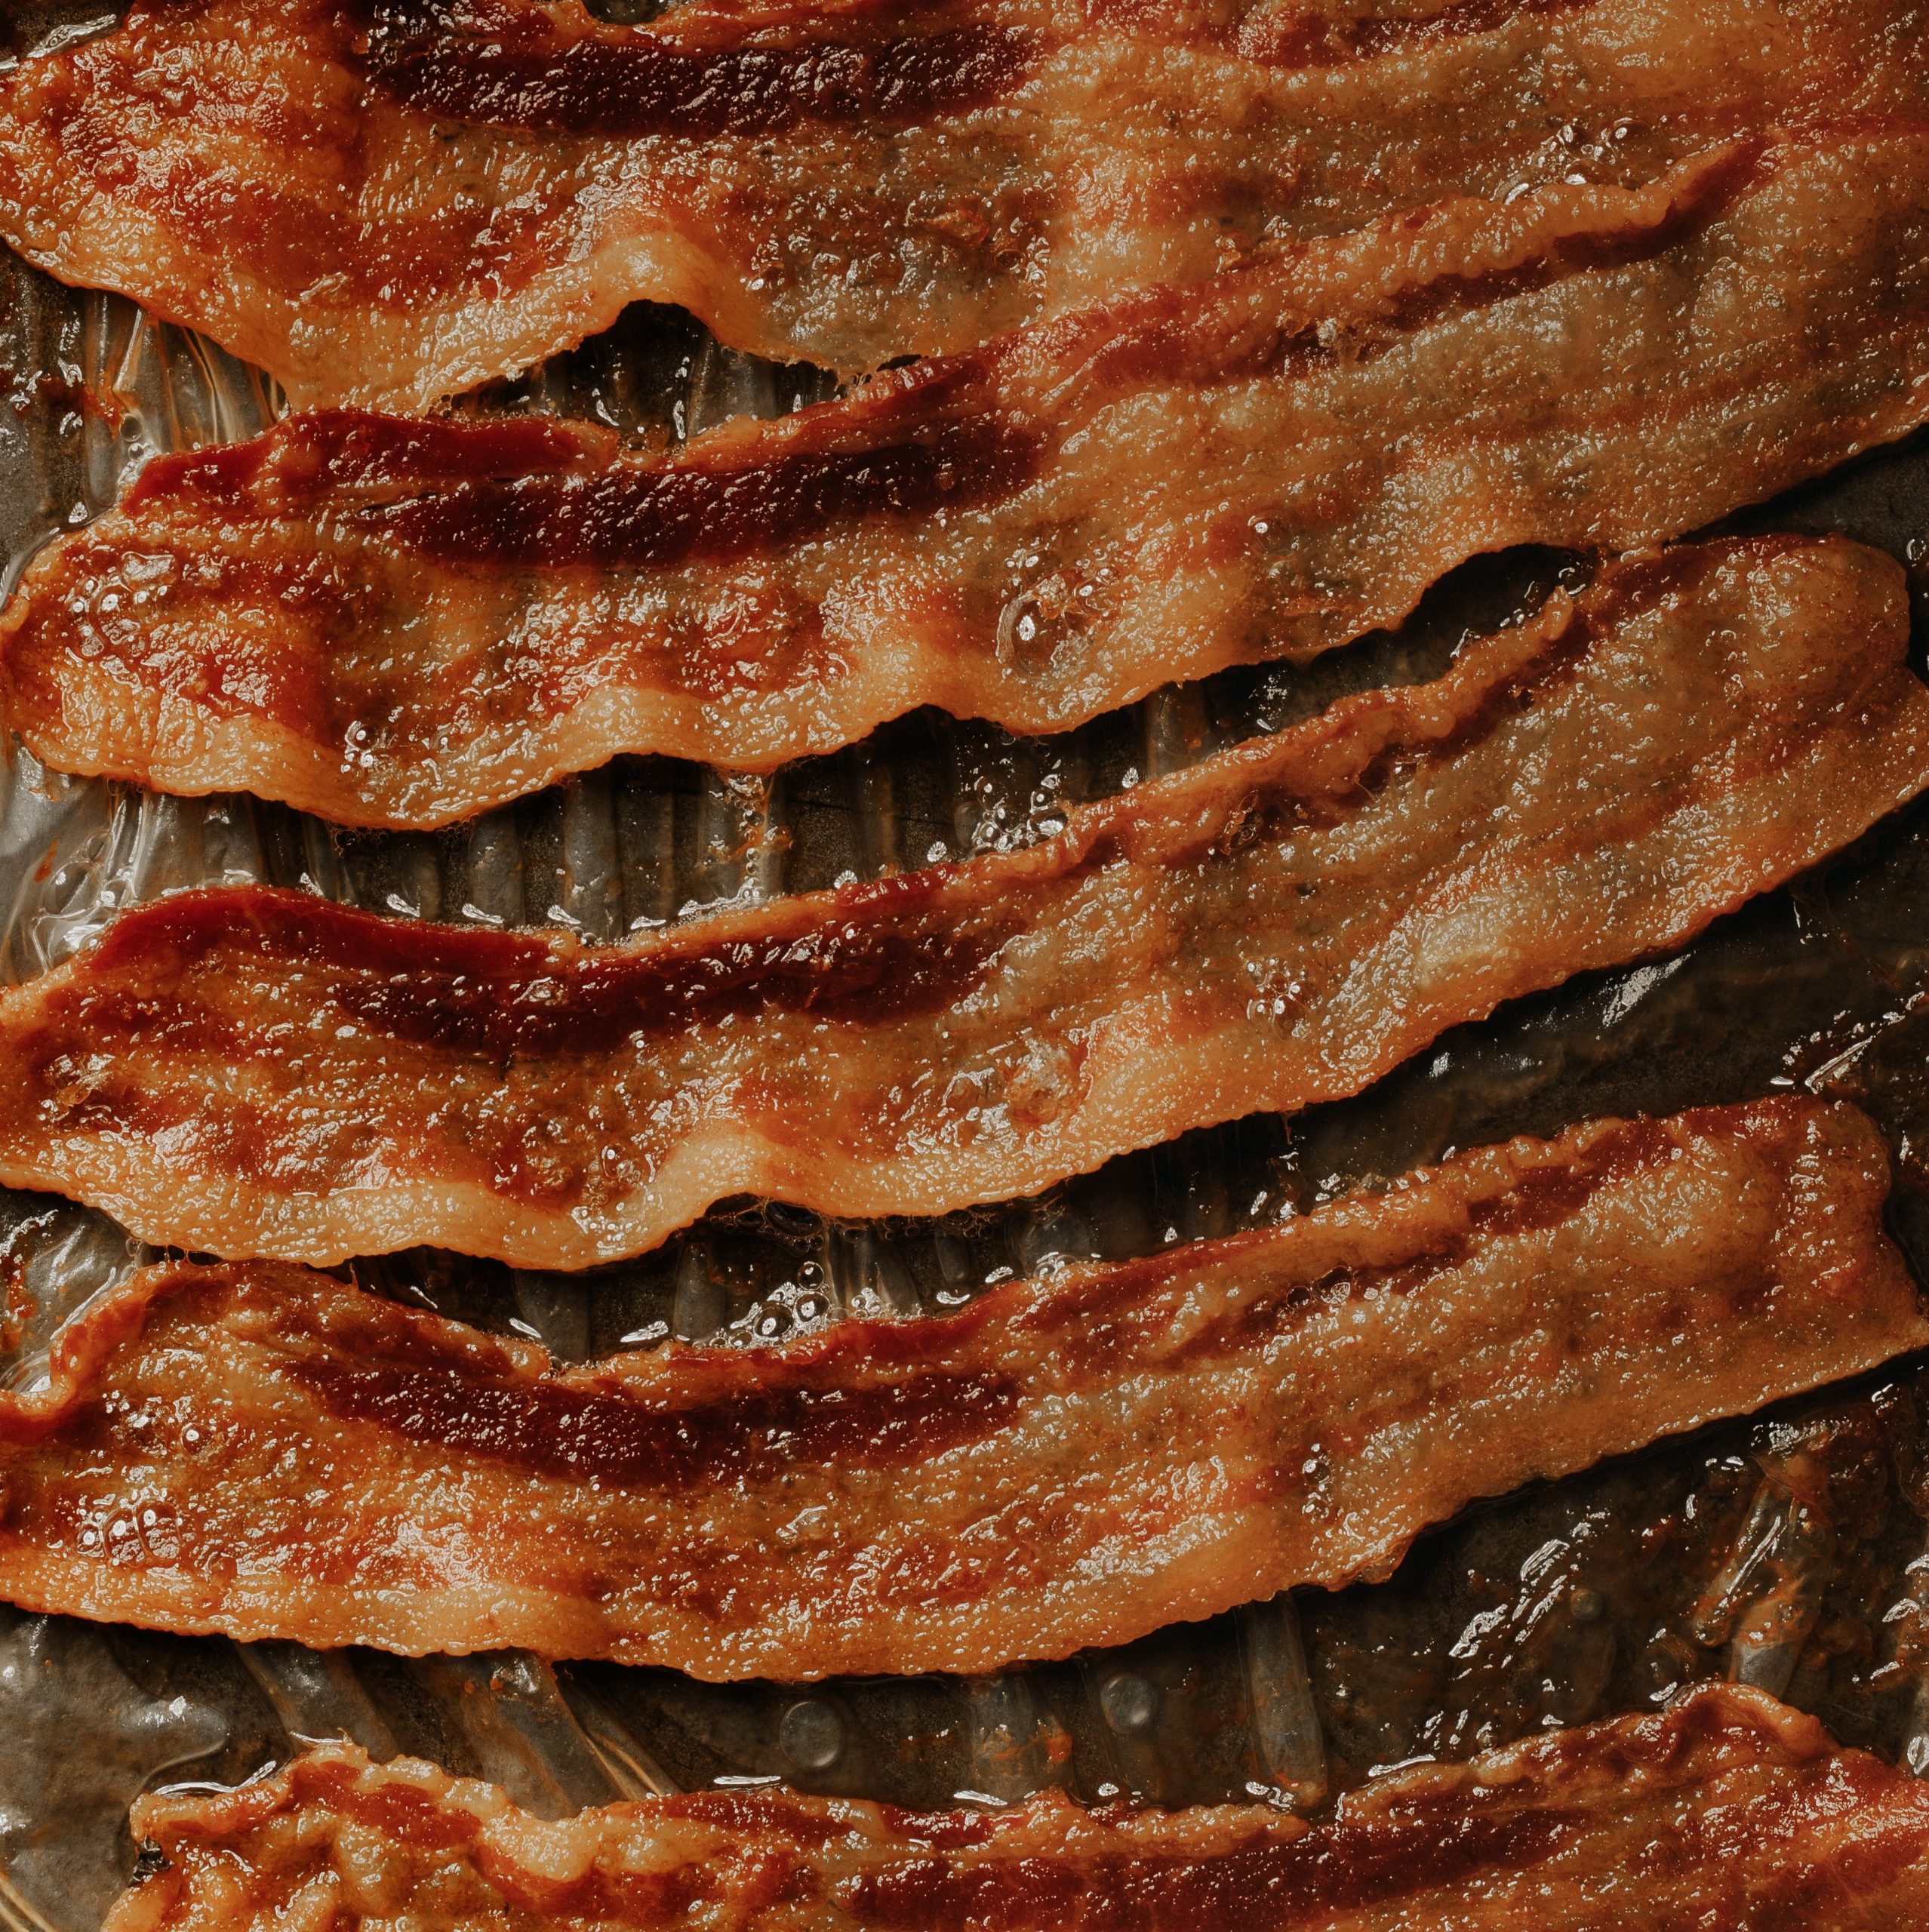 https://www.infraovens.com/wp-content/uploads/2020/12/Convection-Oven-Bacon-edited-scaled.jpg